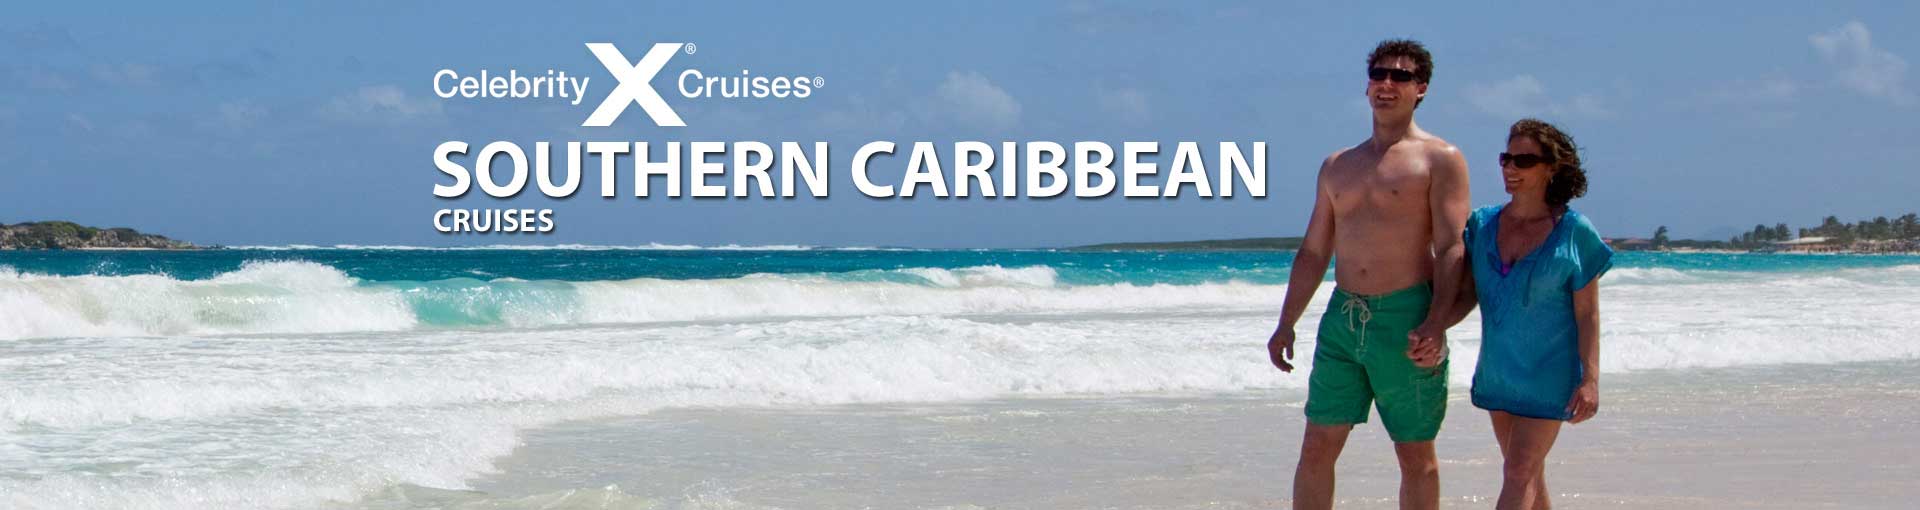 celebrity cruise lines southern caribbean